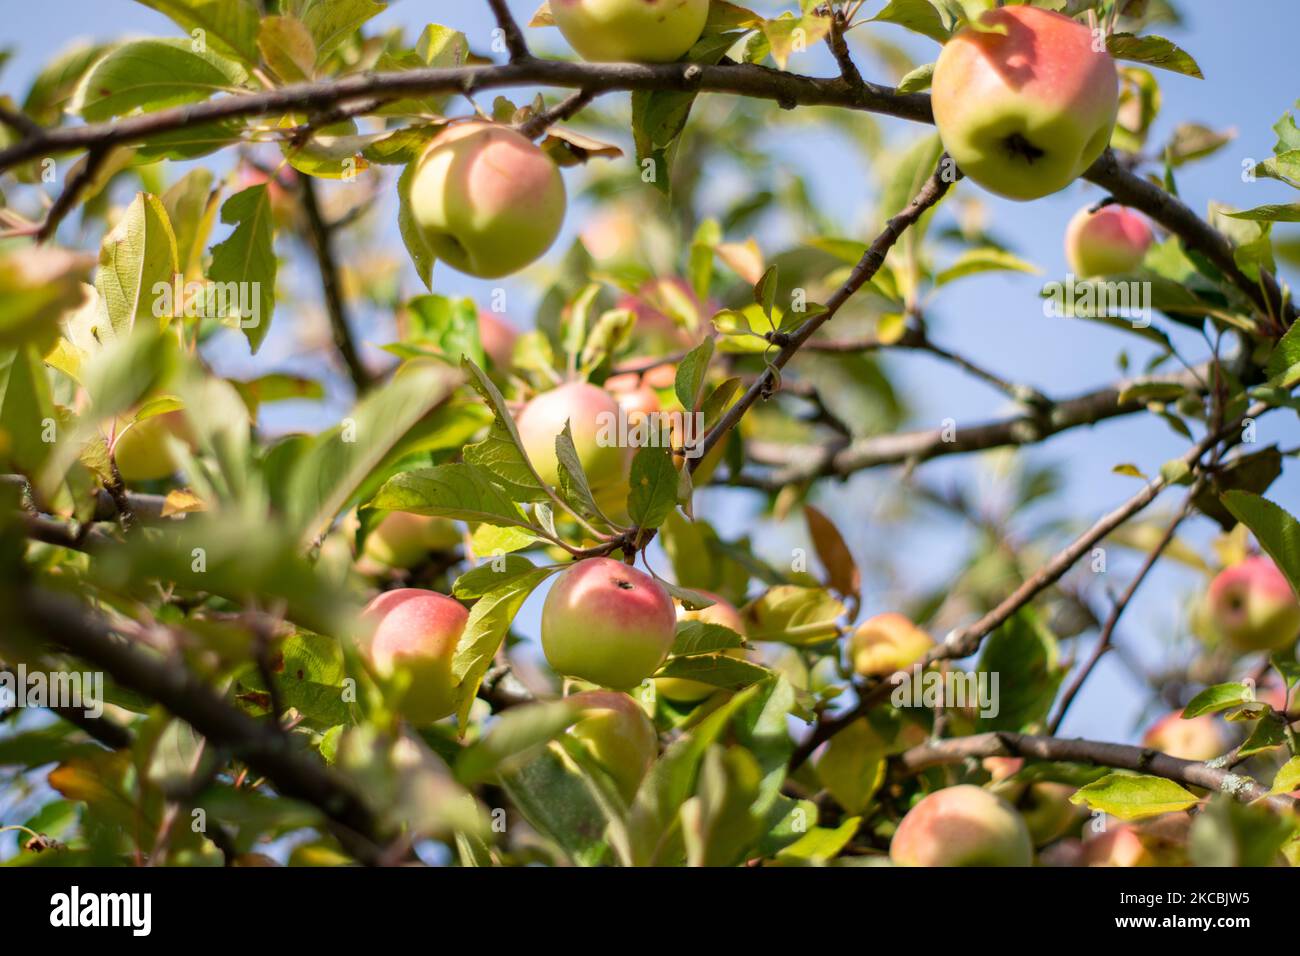 Natural Apples without chemicals or treatments Stock Photo